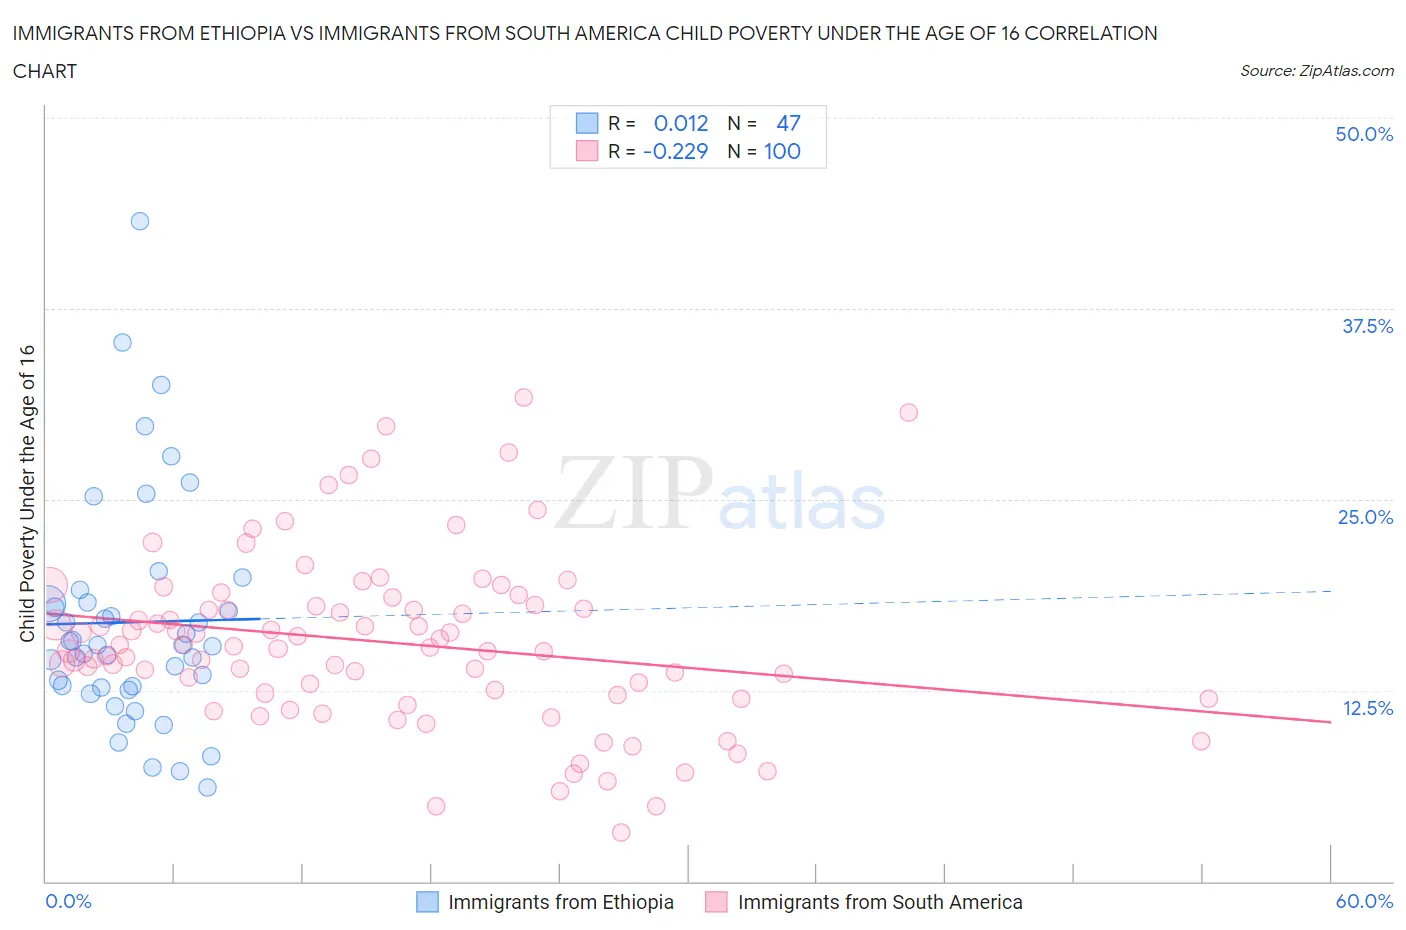 Immigrants from Ethiopia vs Immigrants from South America Child Poverty Under the Age of 16